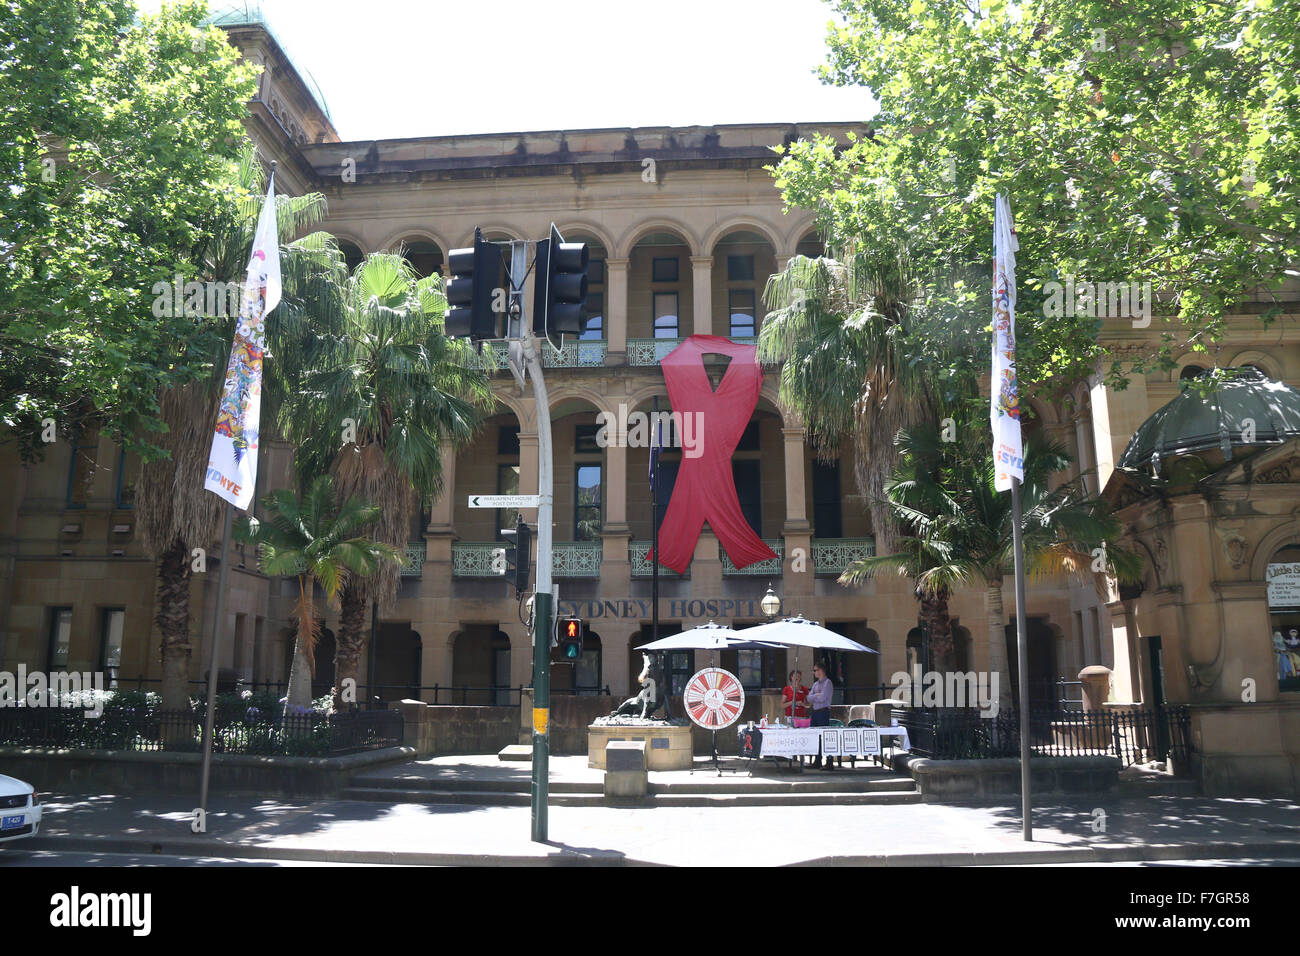 Sydney, Australia. 1 December 2015. The Sydney Hospital on Macquarie Street has a giant red ribbon for World AIDS Day. World AIDS Day raises awareness around the world about the issues surrounding HIV and AIDS. It is a day for people to show their support for people living with HIV and to commemorate people who have died. Copyright Credit:  2015 Richard Milnes/Alamy Live News. Stock Photo